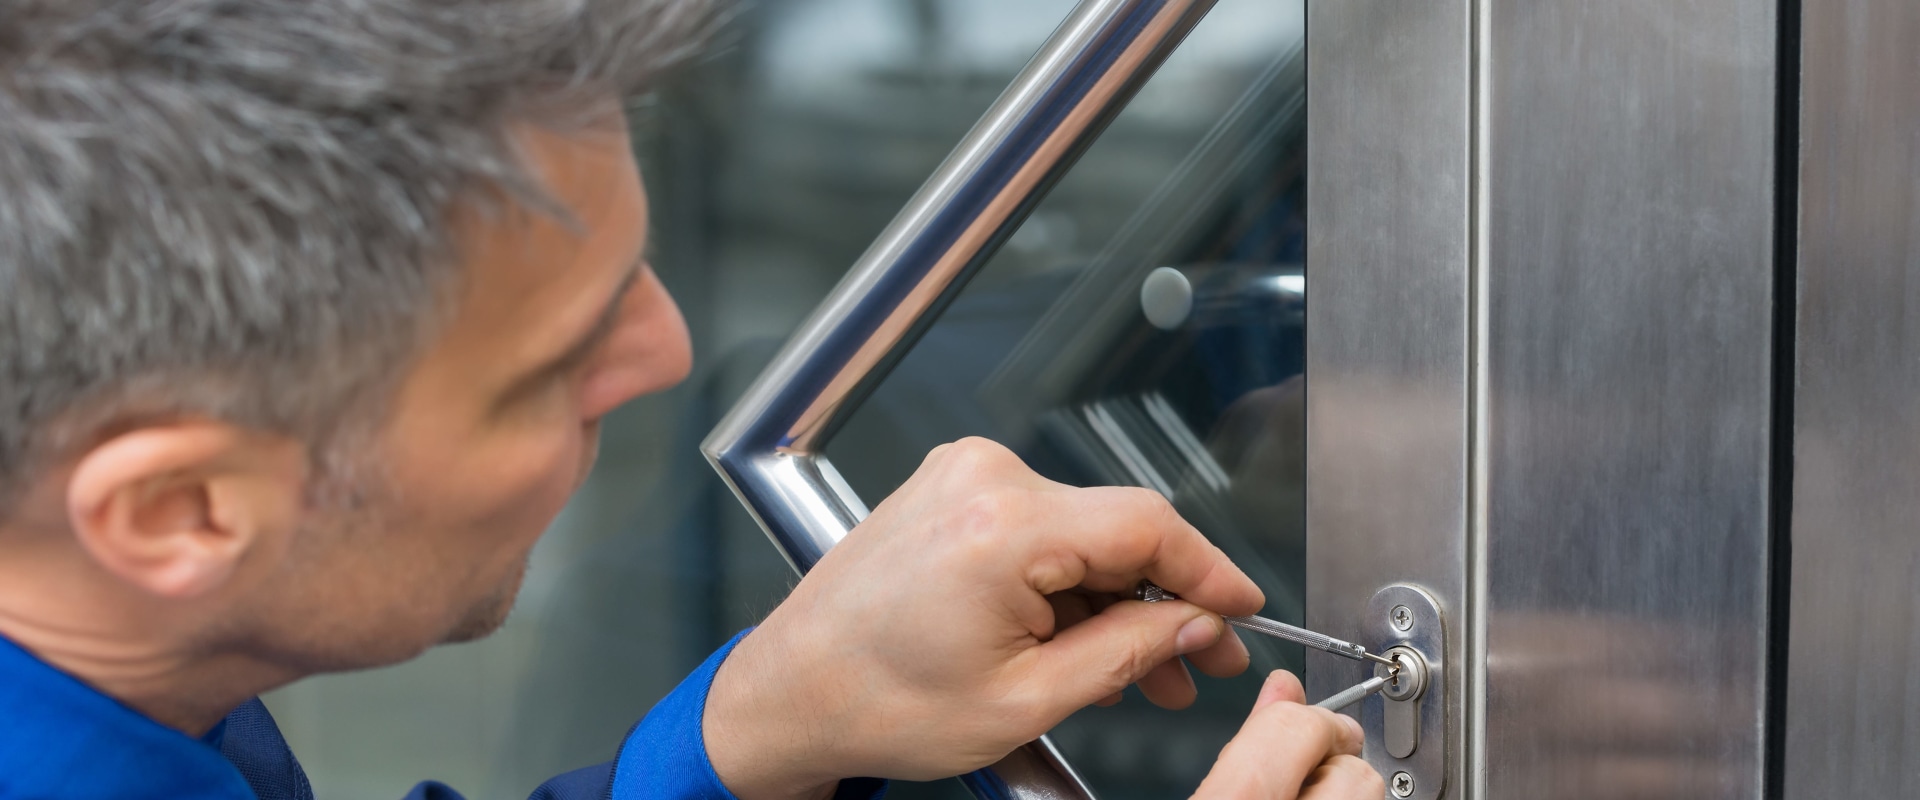 Verifying Ownership: What Do Locksmiths Require?